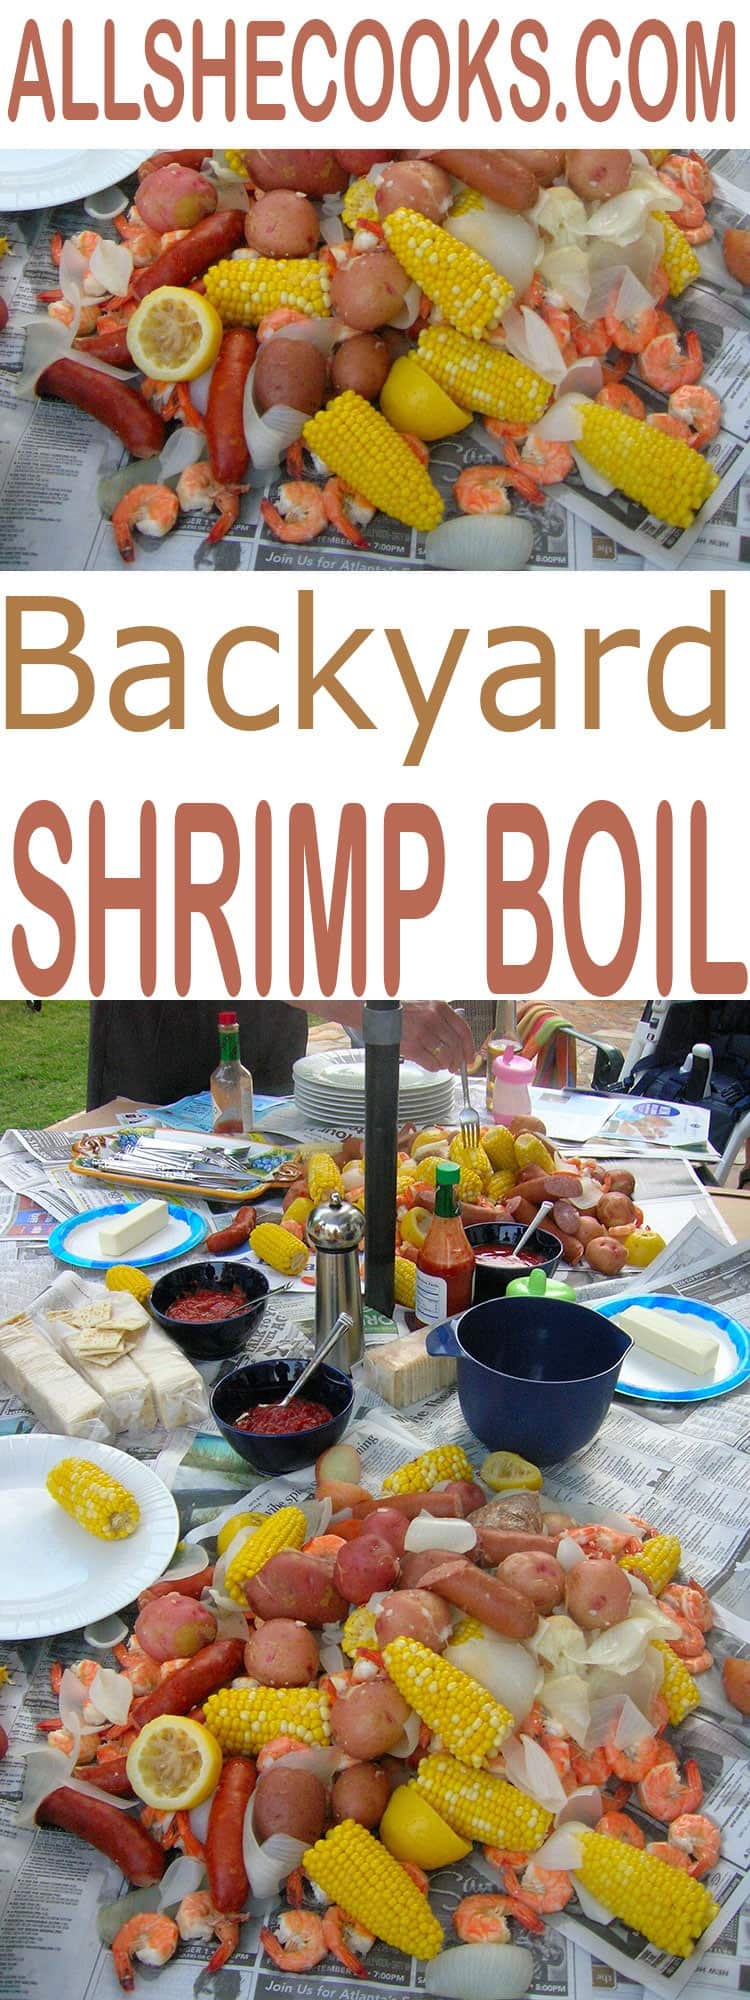 Make a Backyard Shrimp Boil This Summer, Perfect Party Meal! This easy to make recipe can be made inside or outside. You will want to make this at least a few times each year.